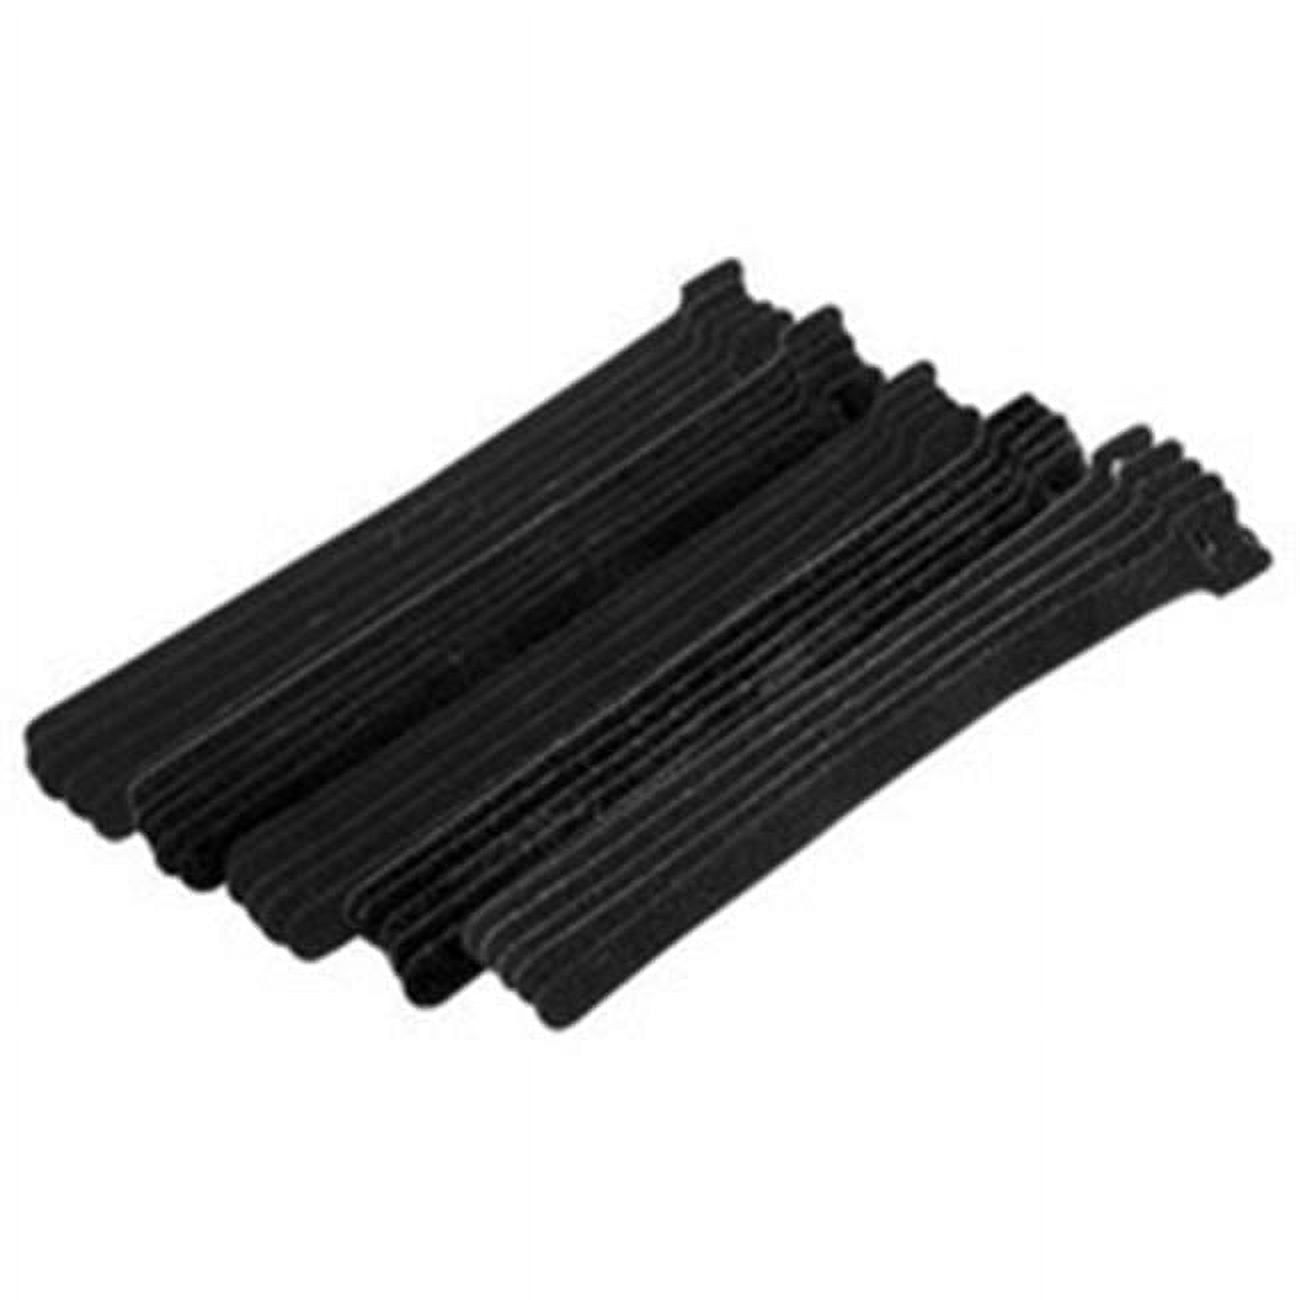 Picture of CableWholesale 30CT-02280 0.50 x 8 in. Black Hook & Loop Cable Strap with Eye - Pack of 25